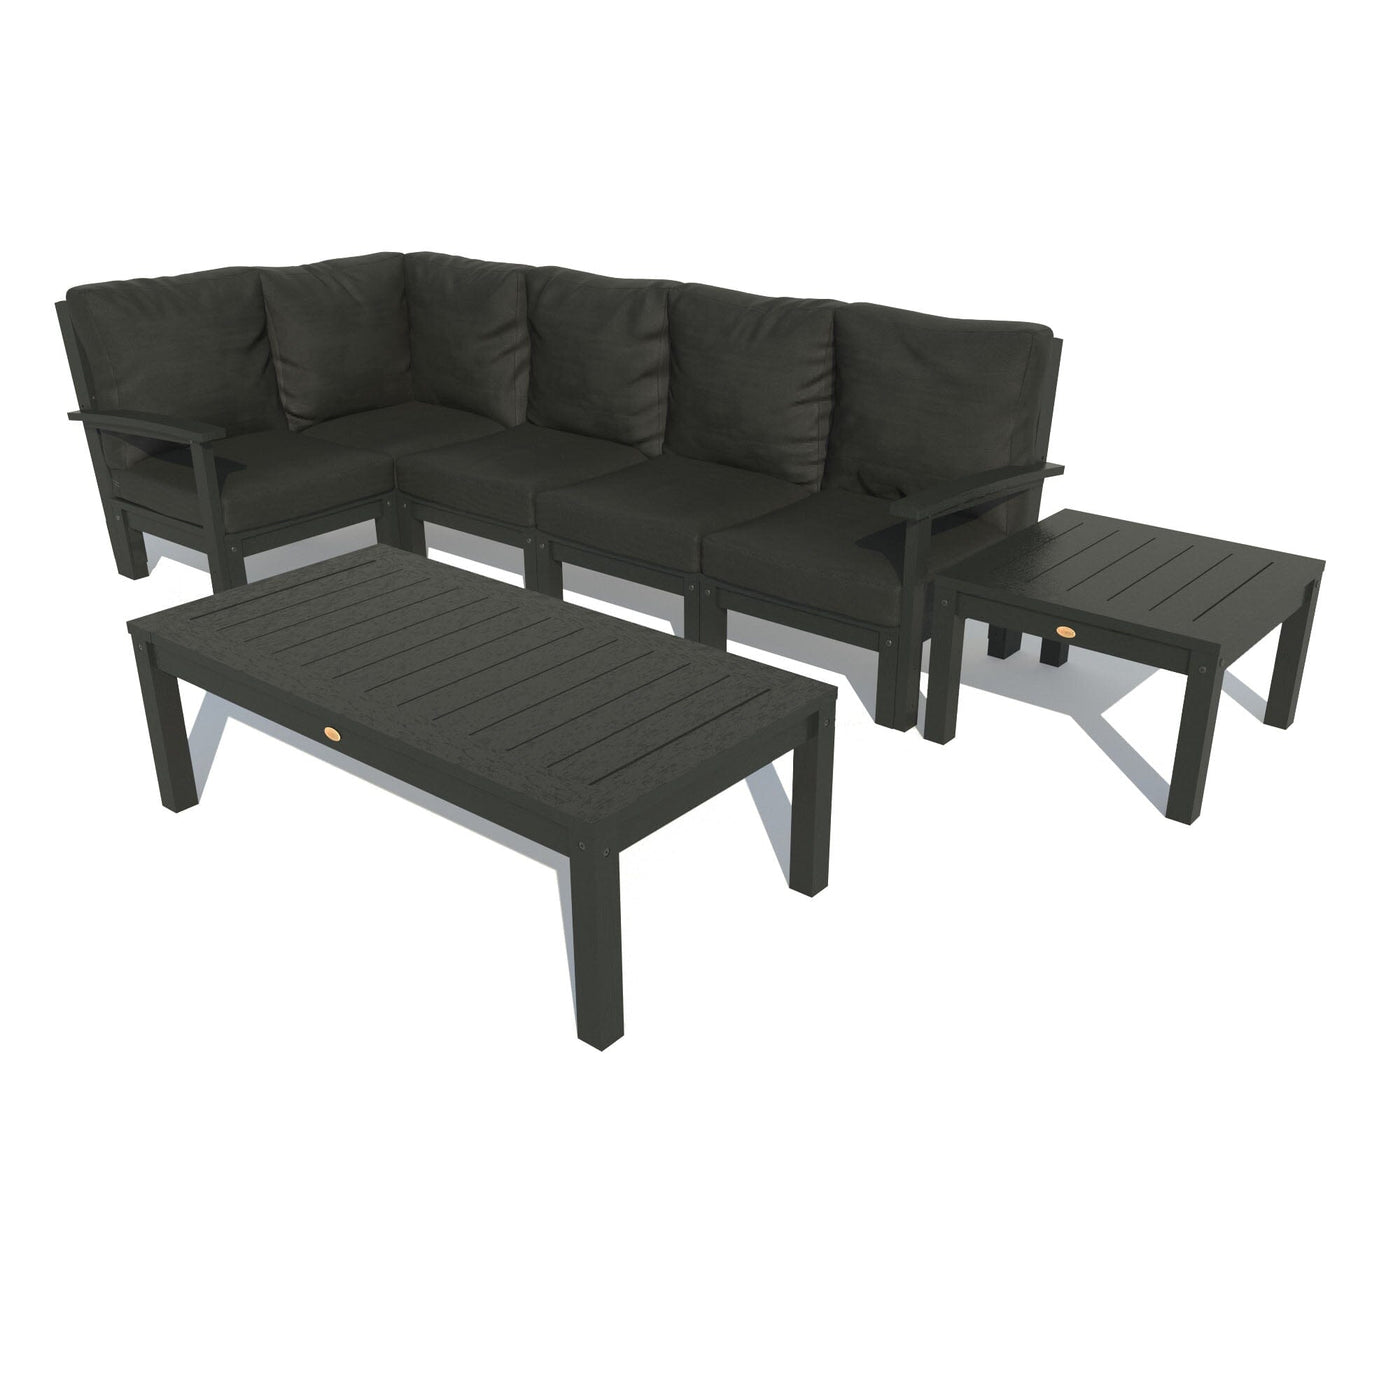 Bespoke Deep Seating: 7 Piece Sectional Set with Conversation and Side Table Deep Seating Highwood USA Jet Black Black 